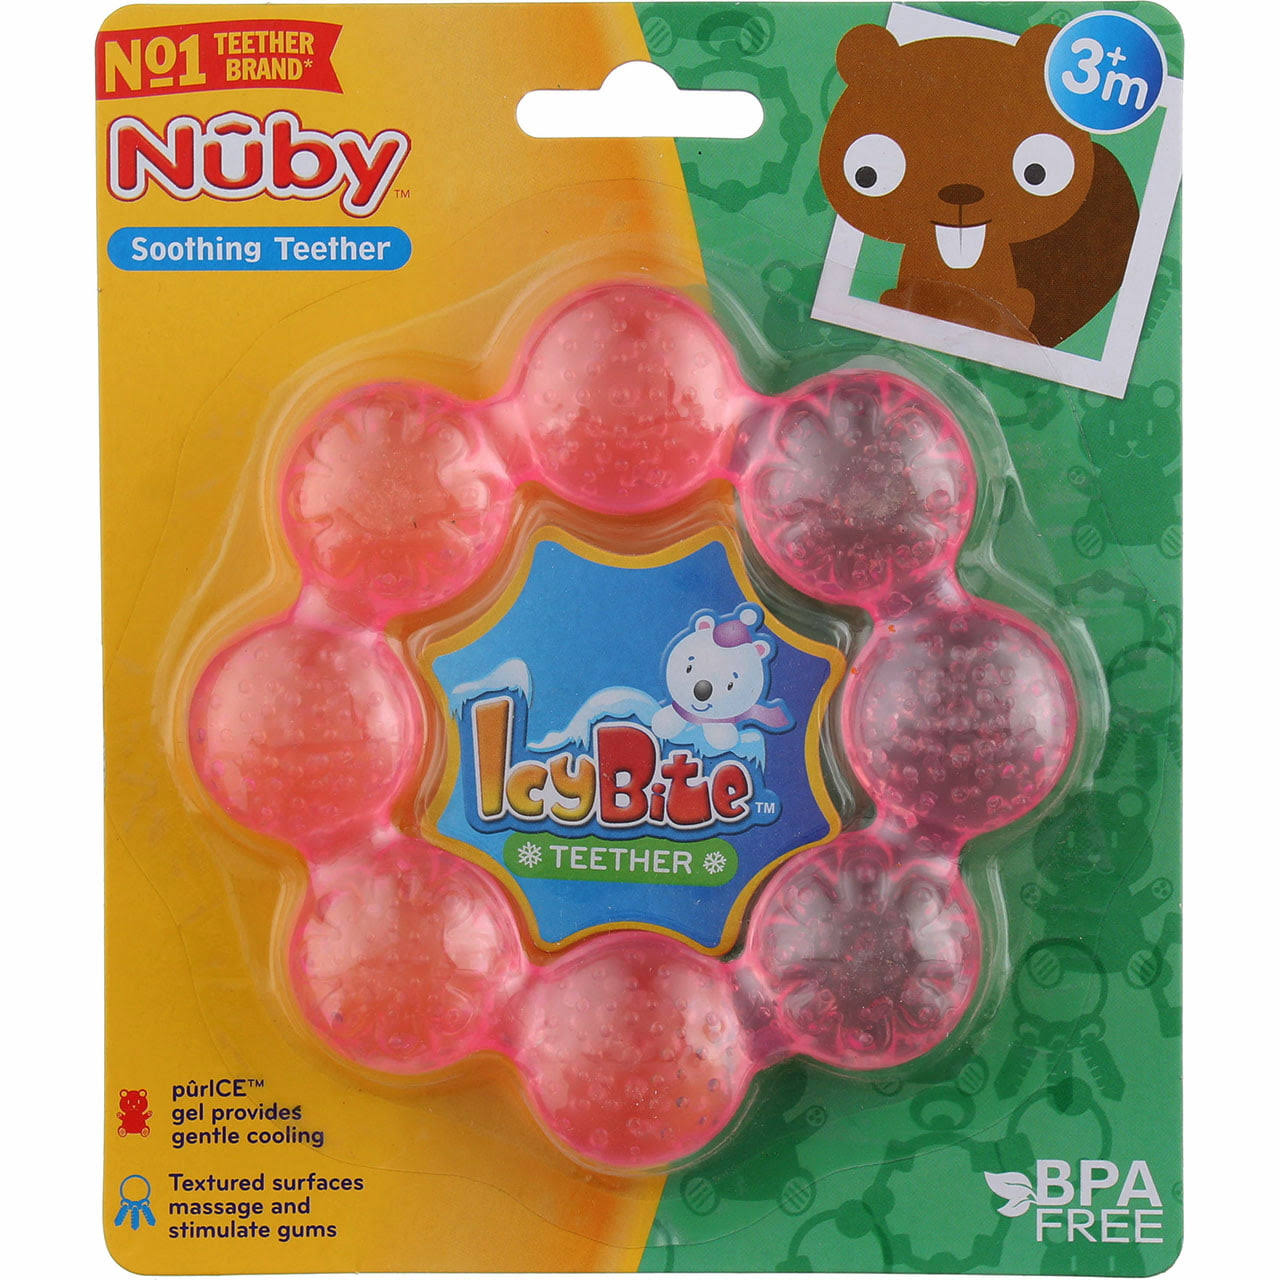 Nuby Icybite Soother Ring Teether